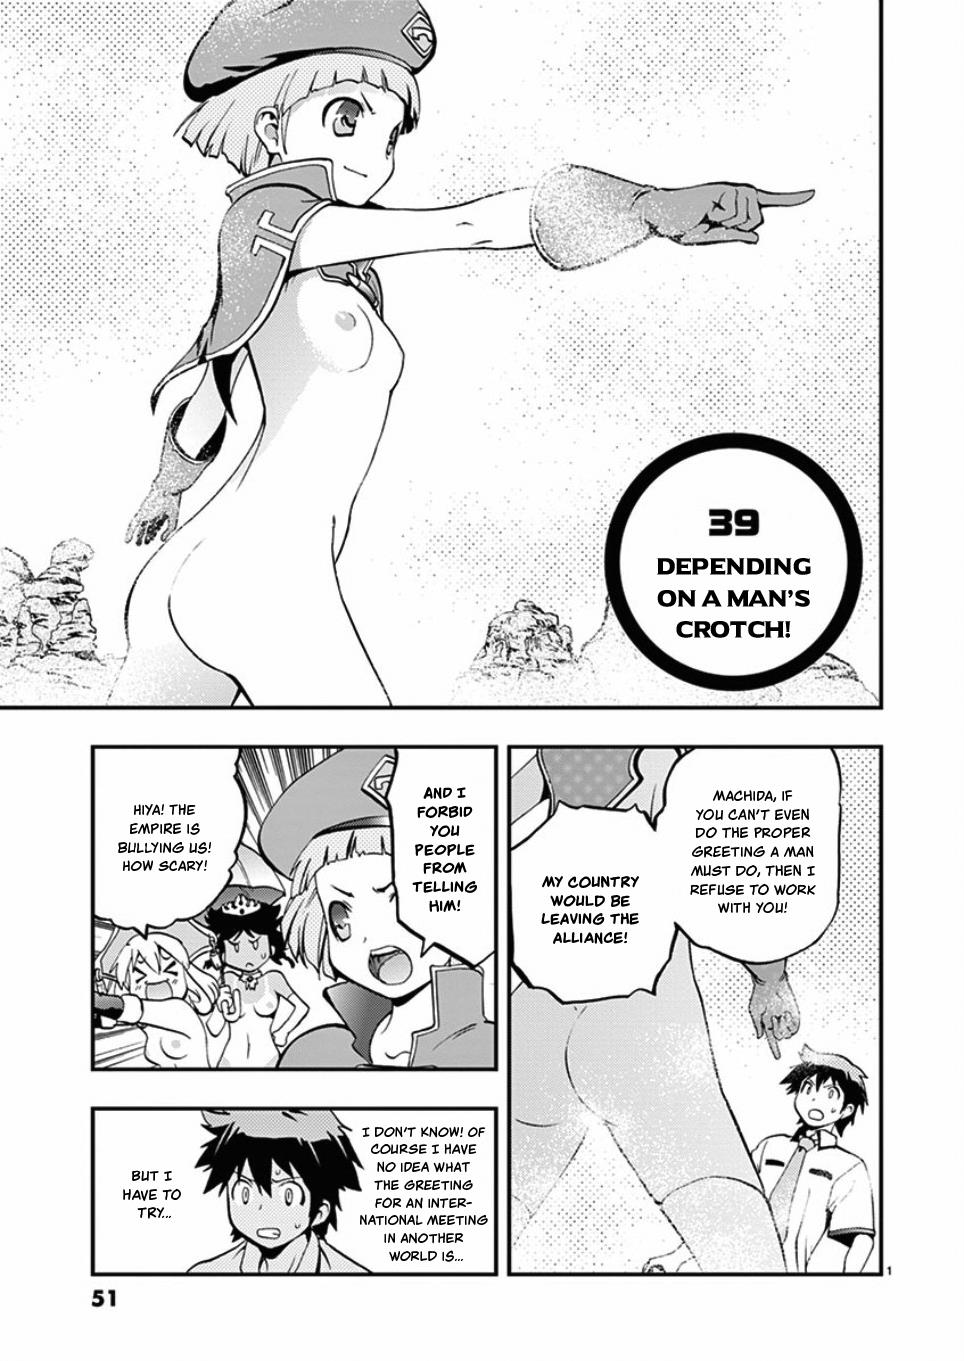 Card Girl! Maiden Summoning Undressing Wars Vol.4 Chapter 39: Depending On A Man's Crotch! - Picture 1